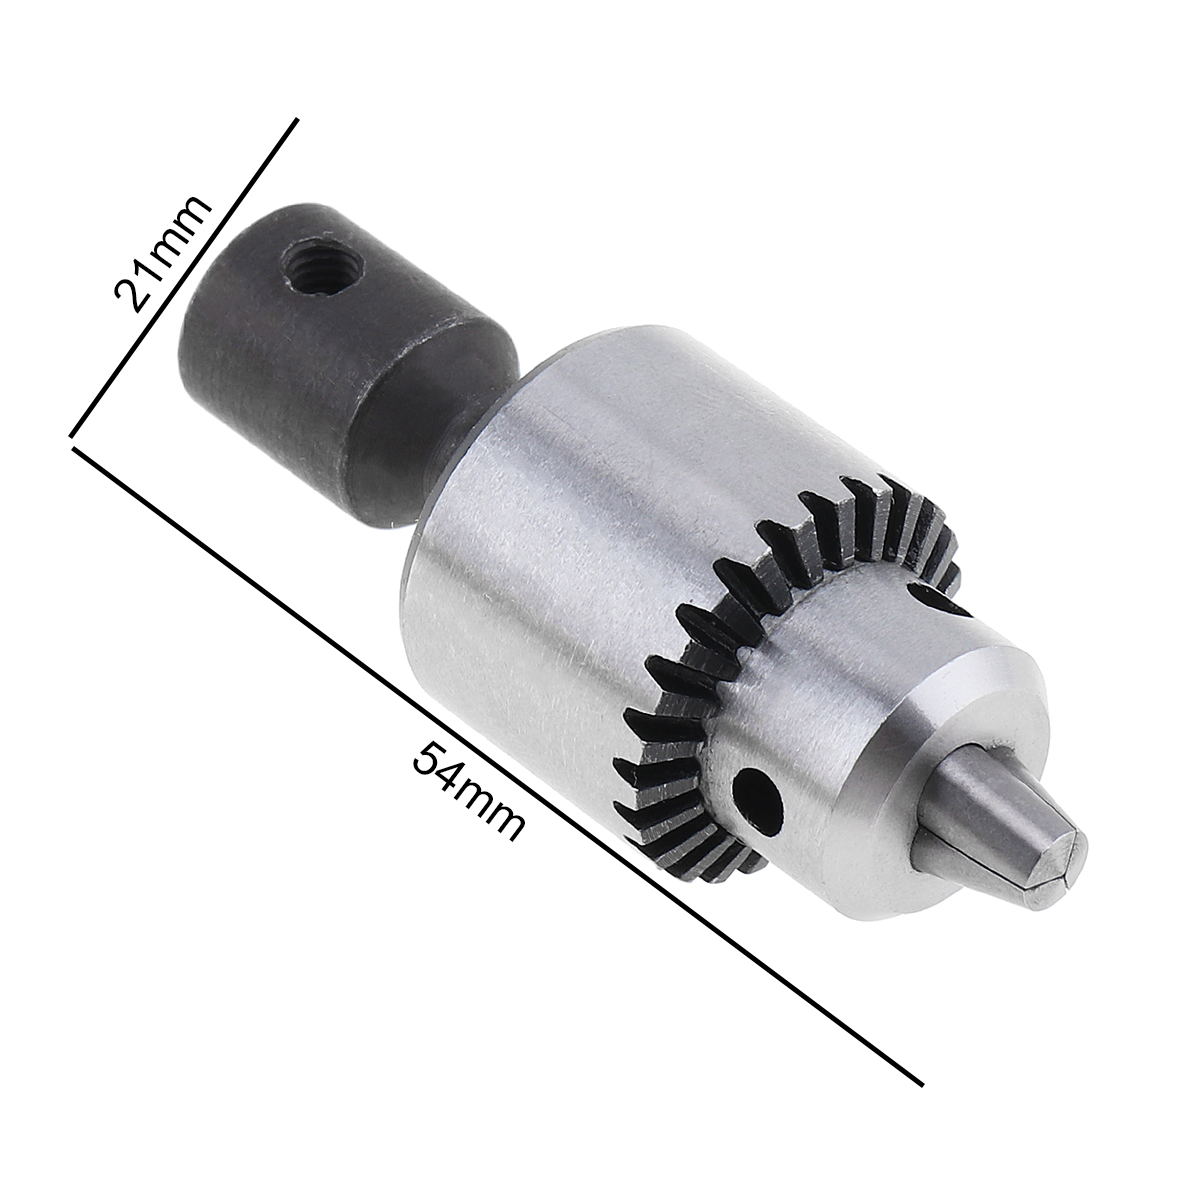 Mini Drill Chuck Micro JTO 0.3-4mm Drill Collet Chuck with 5mm Connect Rod and Key Wrench for Power Tool Accessories